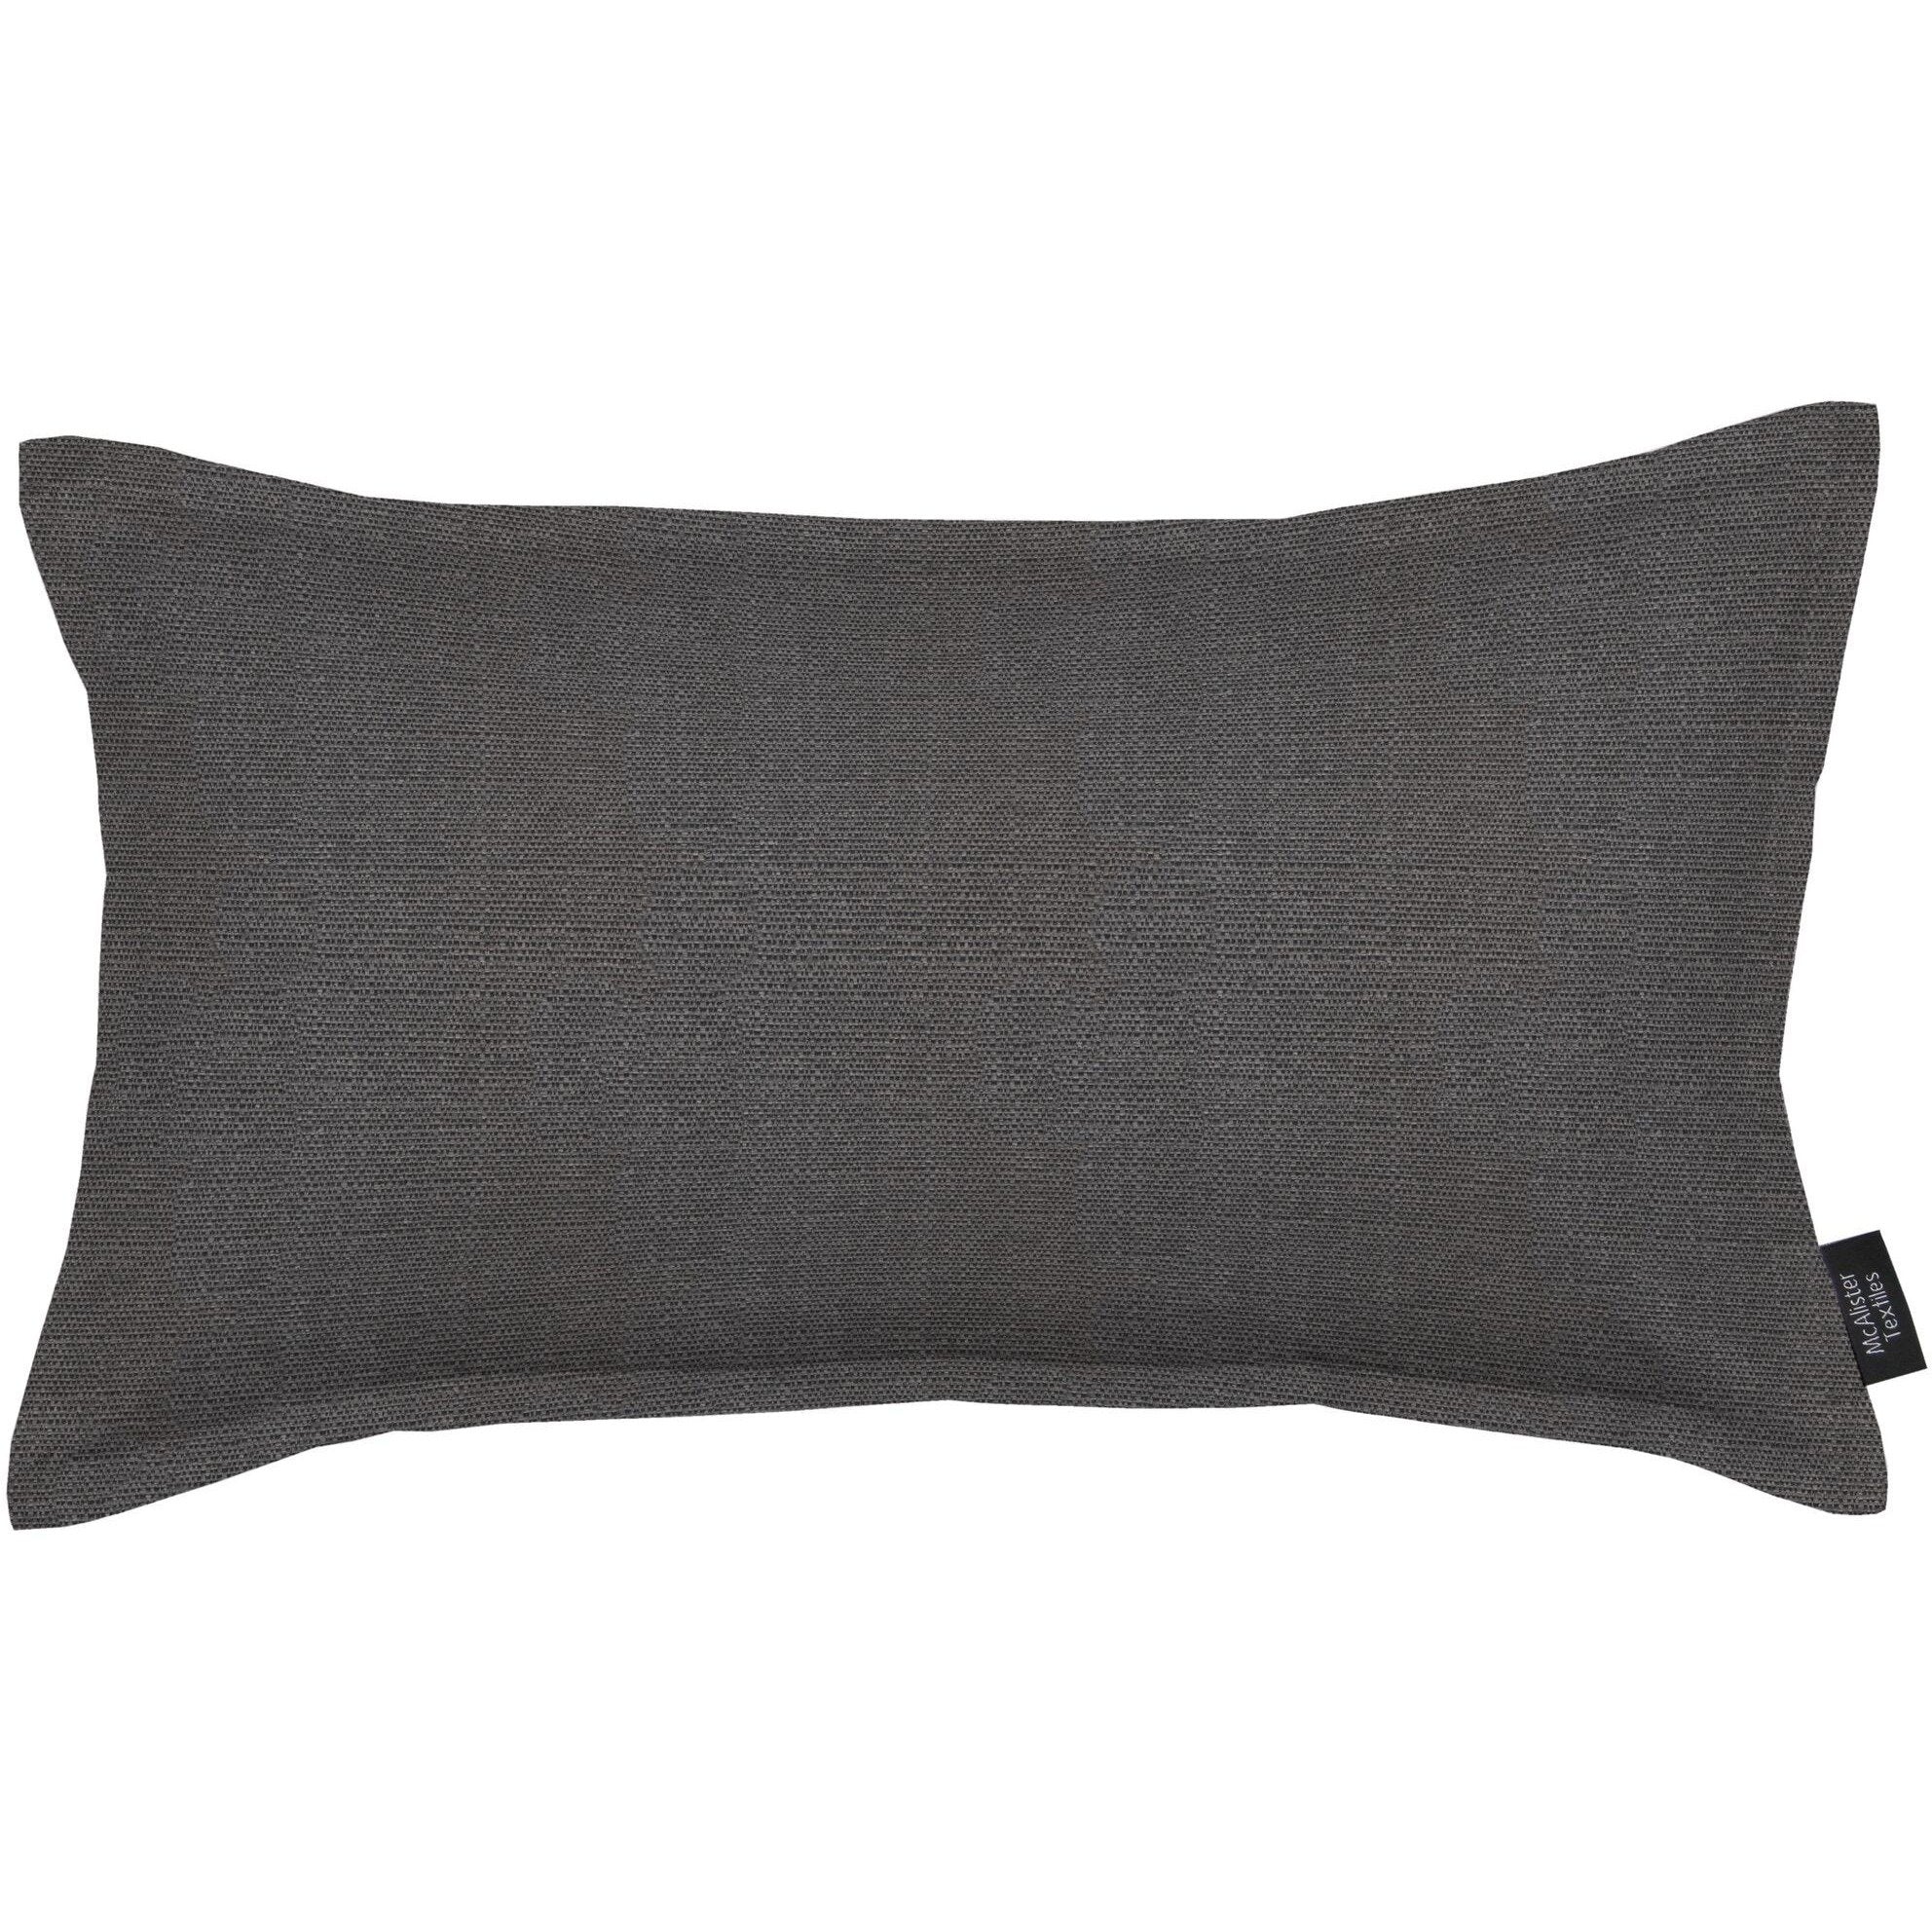 McAlister Textiles Savannah Charcoal Grey Cushion Cushions and Covers Cover Only 50cm x 30cm 